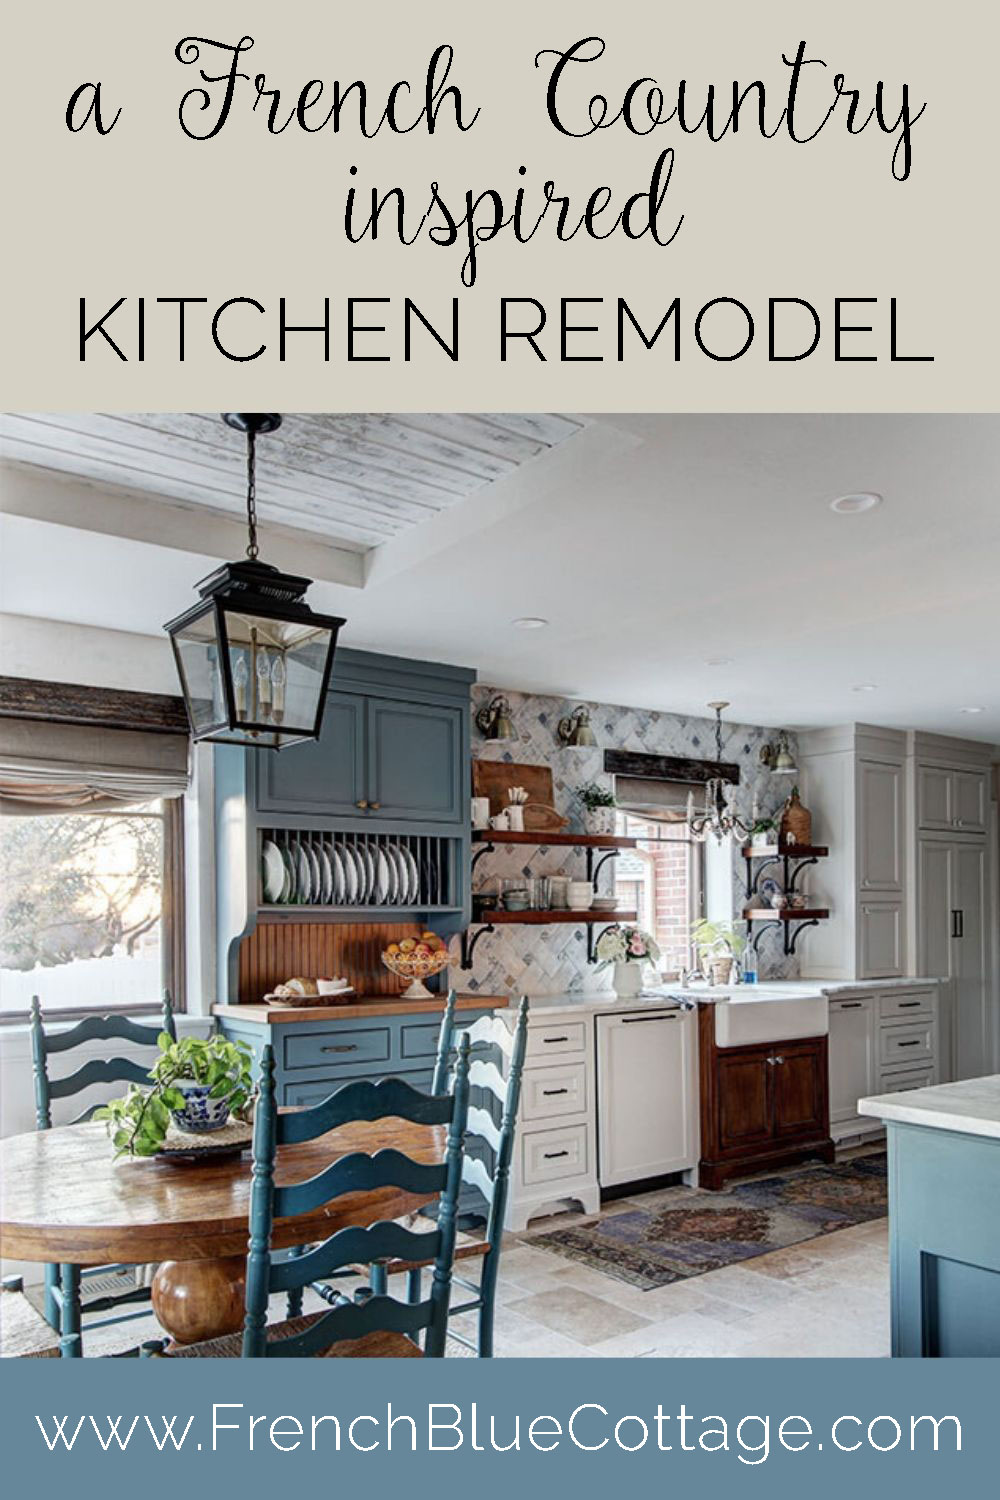 Creating our Dream Kitchen French Country Kitchen reveal • French ...